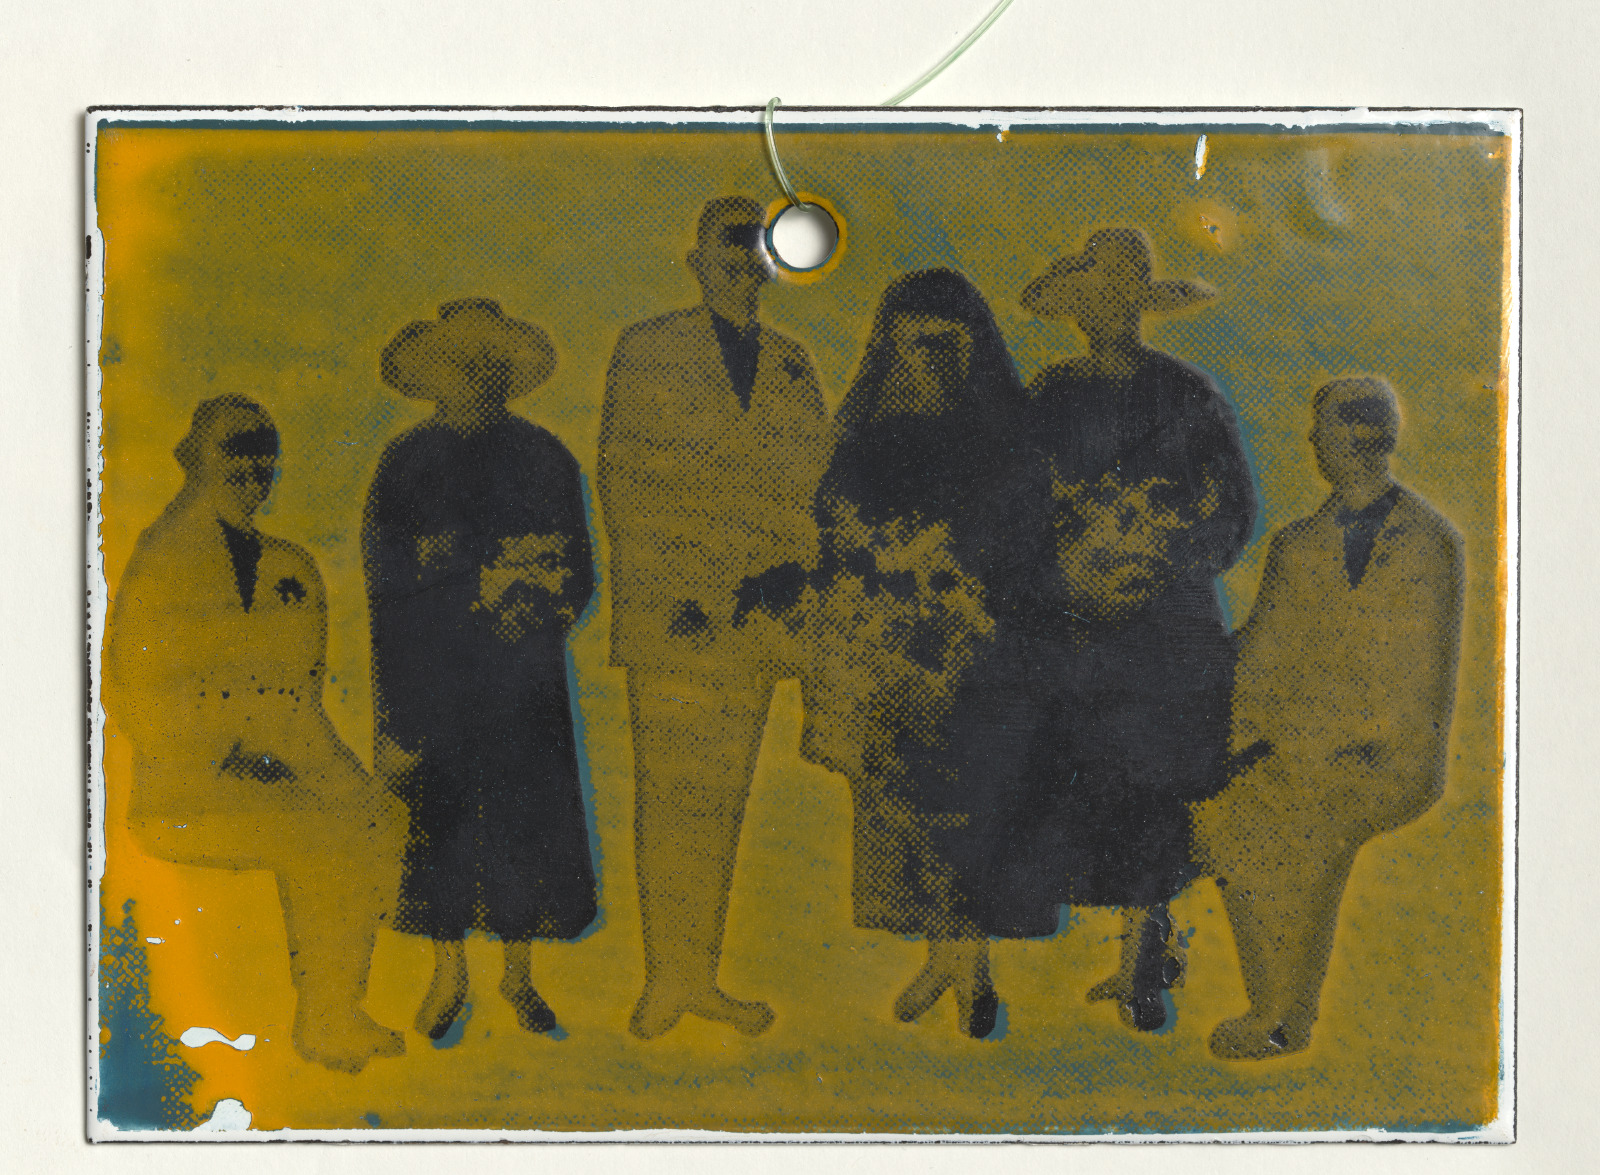 Vivienne Binns and Participants, (detail of) <em>Mothers’ Memories, Others’ Memories: Postcard Rack</em>, 1980, screenprints on vitreous enamel on steel, prints attached by nylon line to anodised steel postcard rack, 90.4 (H) x 27.0 (W) x 27.0 (D) cm (overall), National Gallery of Australia, Canberra (Gift of the Philip Morris Arts Grant 1982). © Vivienne Binns/Copyright Agency.